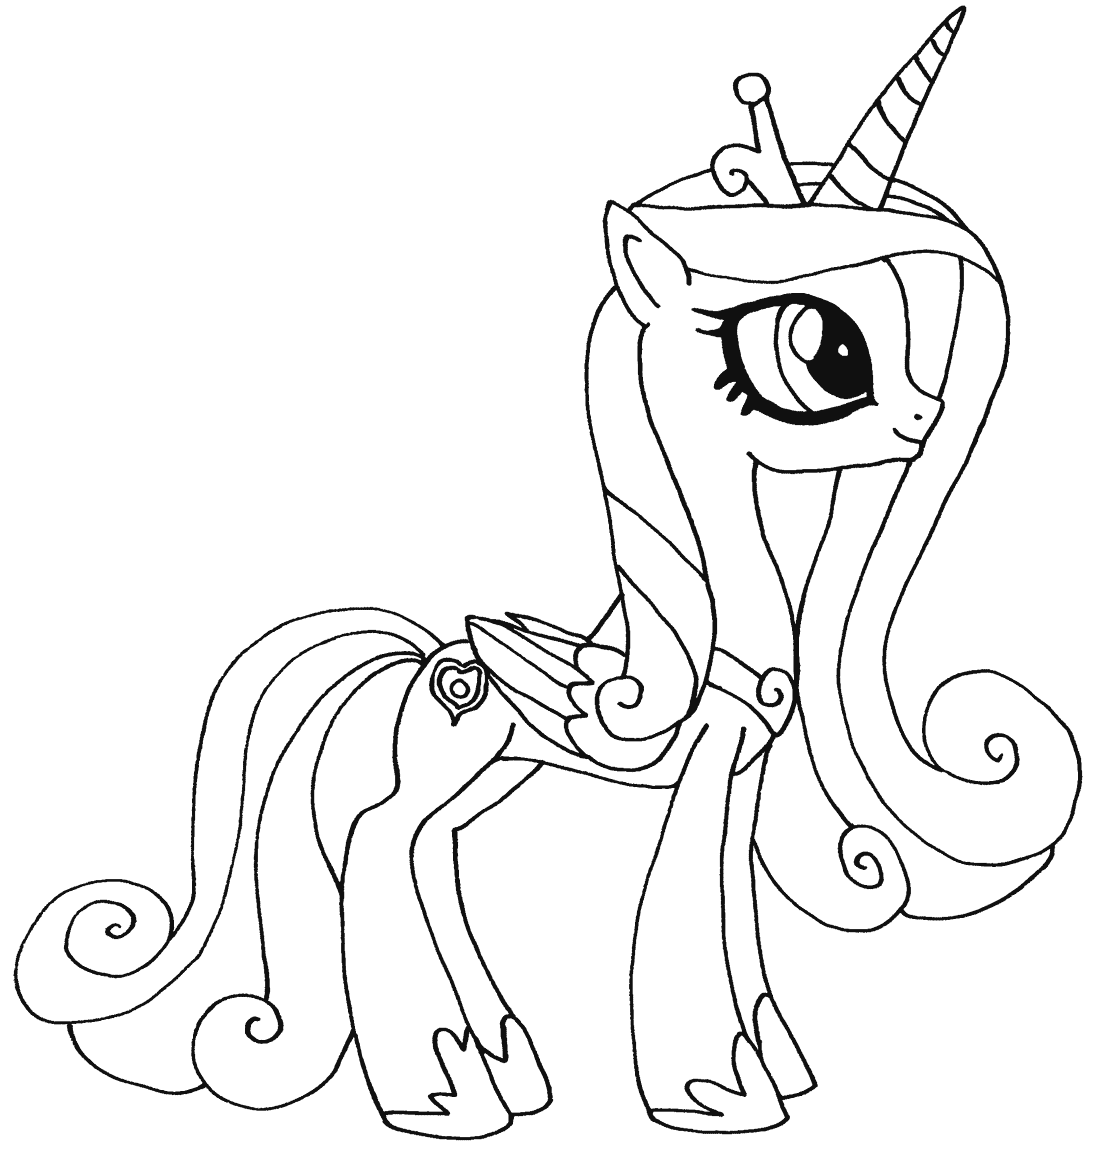 Princess Candance My Little Pony Coloring Page